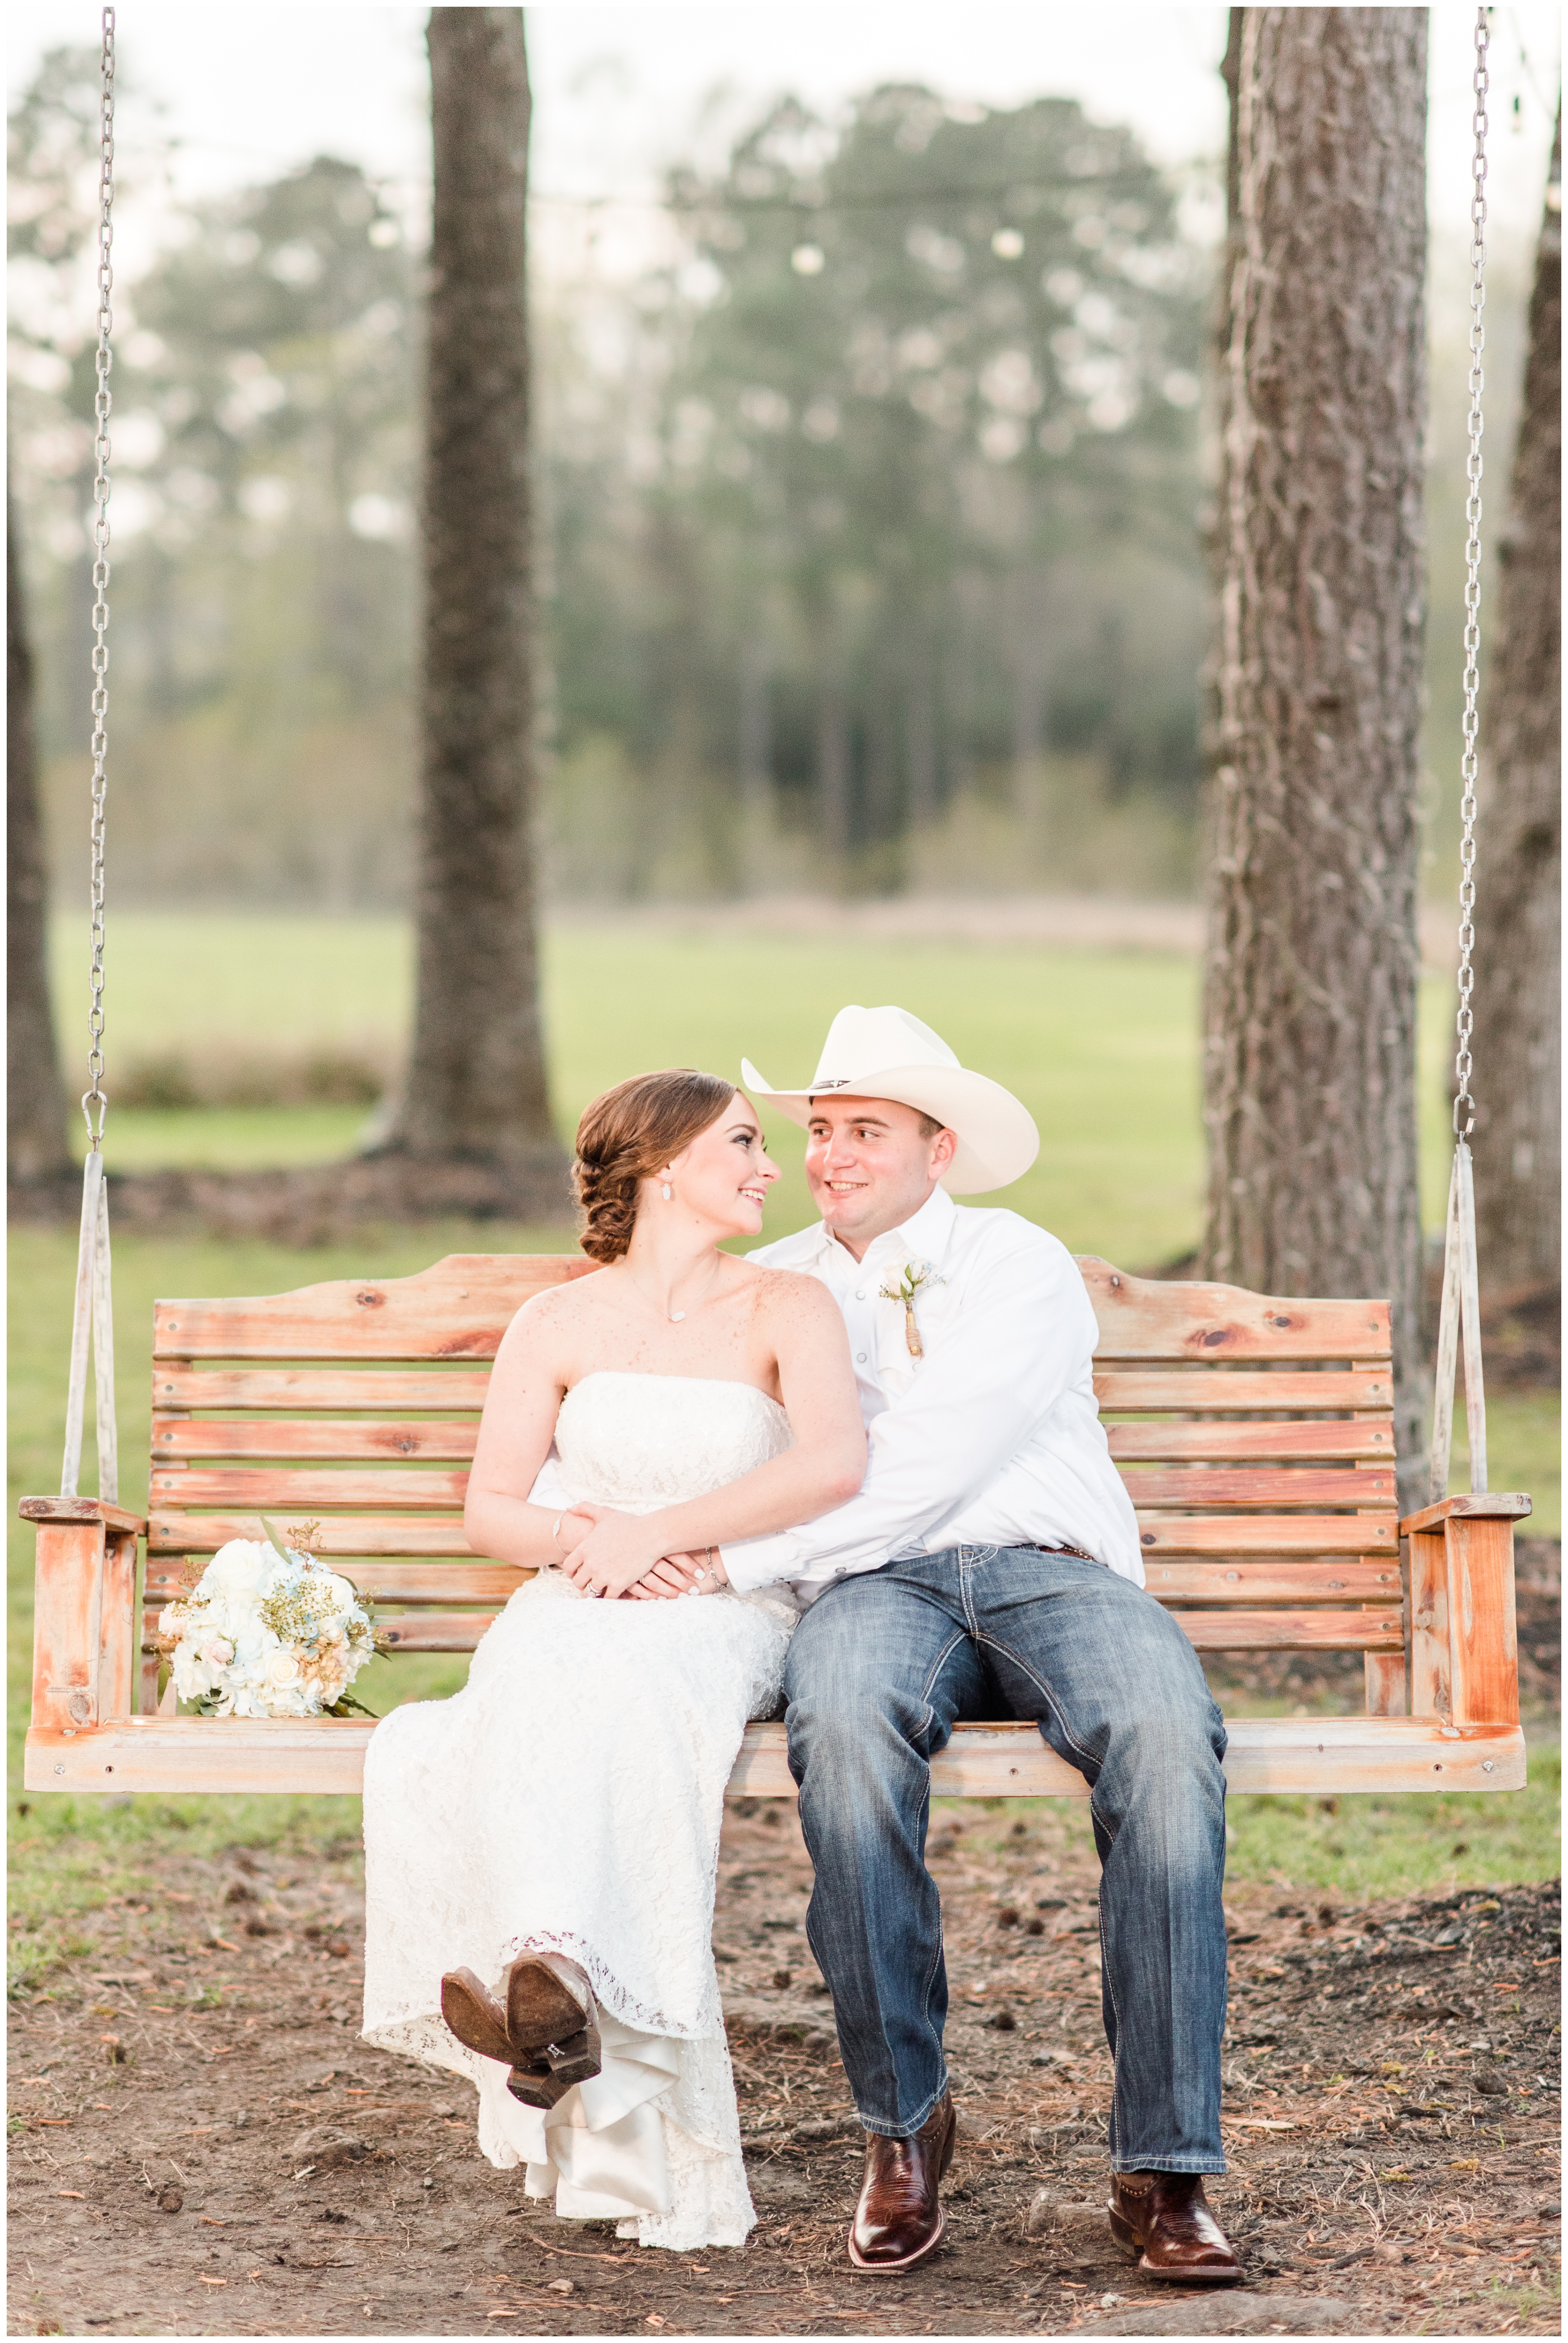 The Barn at Four Pines Wedding in Crosby TX - Kevin and Sammi_0362